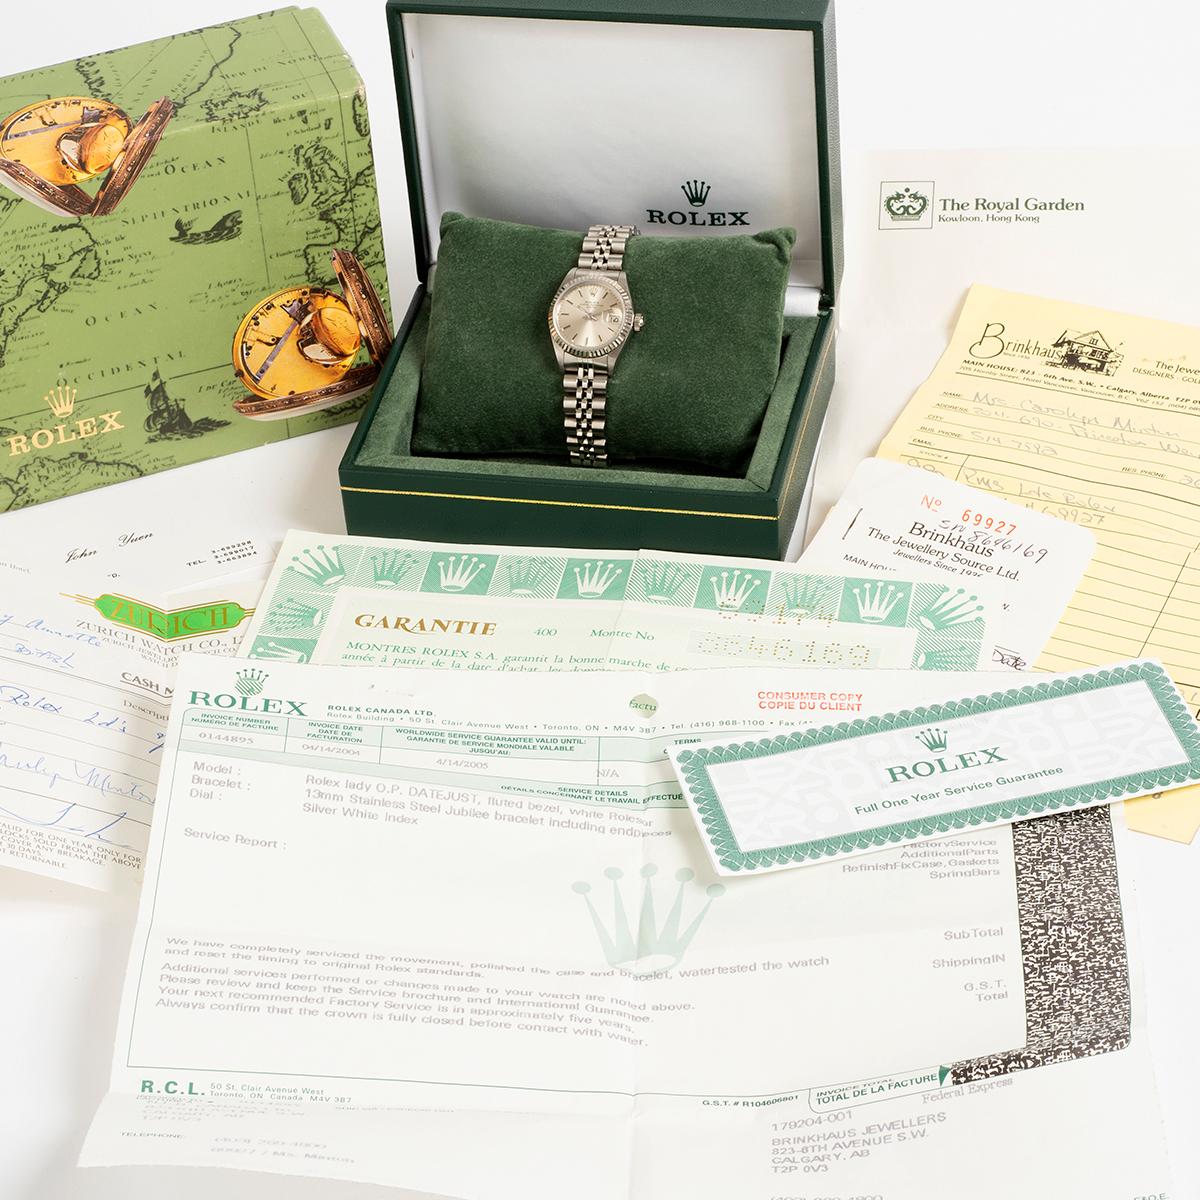 Our classic Rolex Lady Datejust reference 69174 features a 26mm stainless steel case with white gold fluted bezel and jubilee steel bracelet. Presented in excellent condition for its age, our ladies Datejust comes complete with inner and outer box,